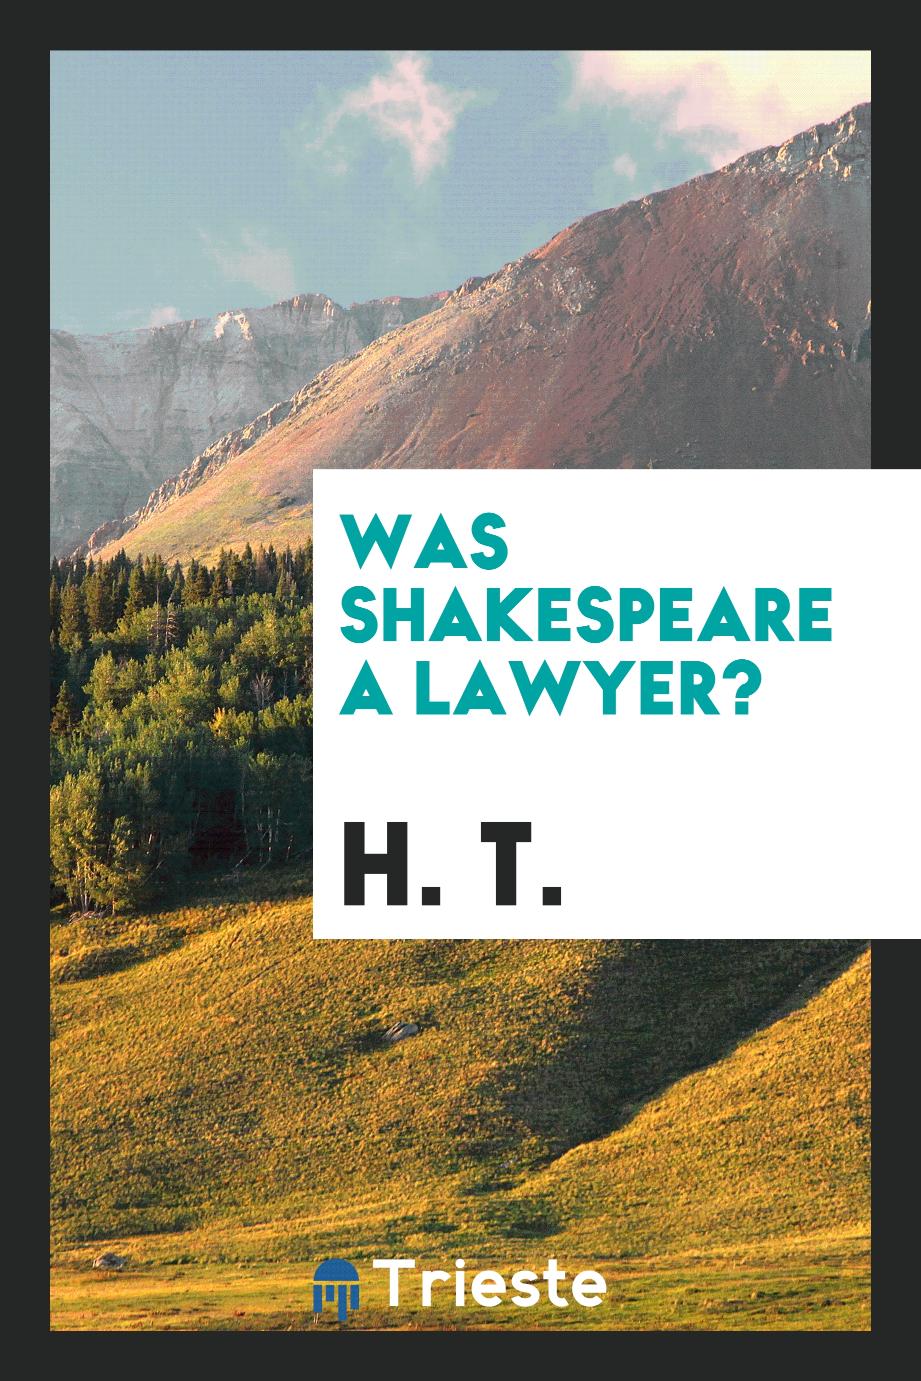 Was Shakespeare a lawyer?